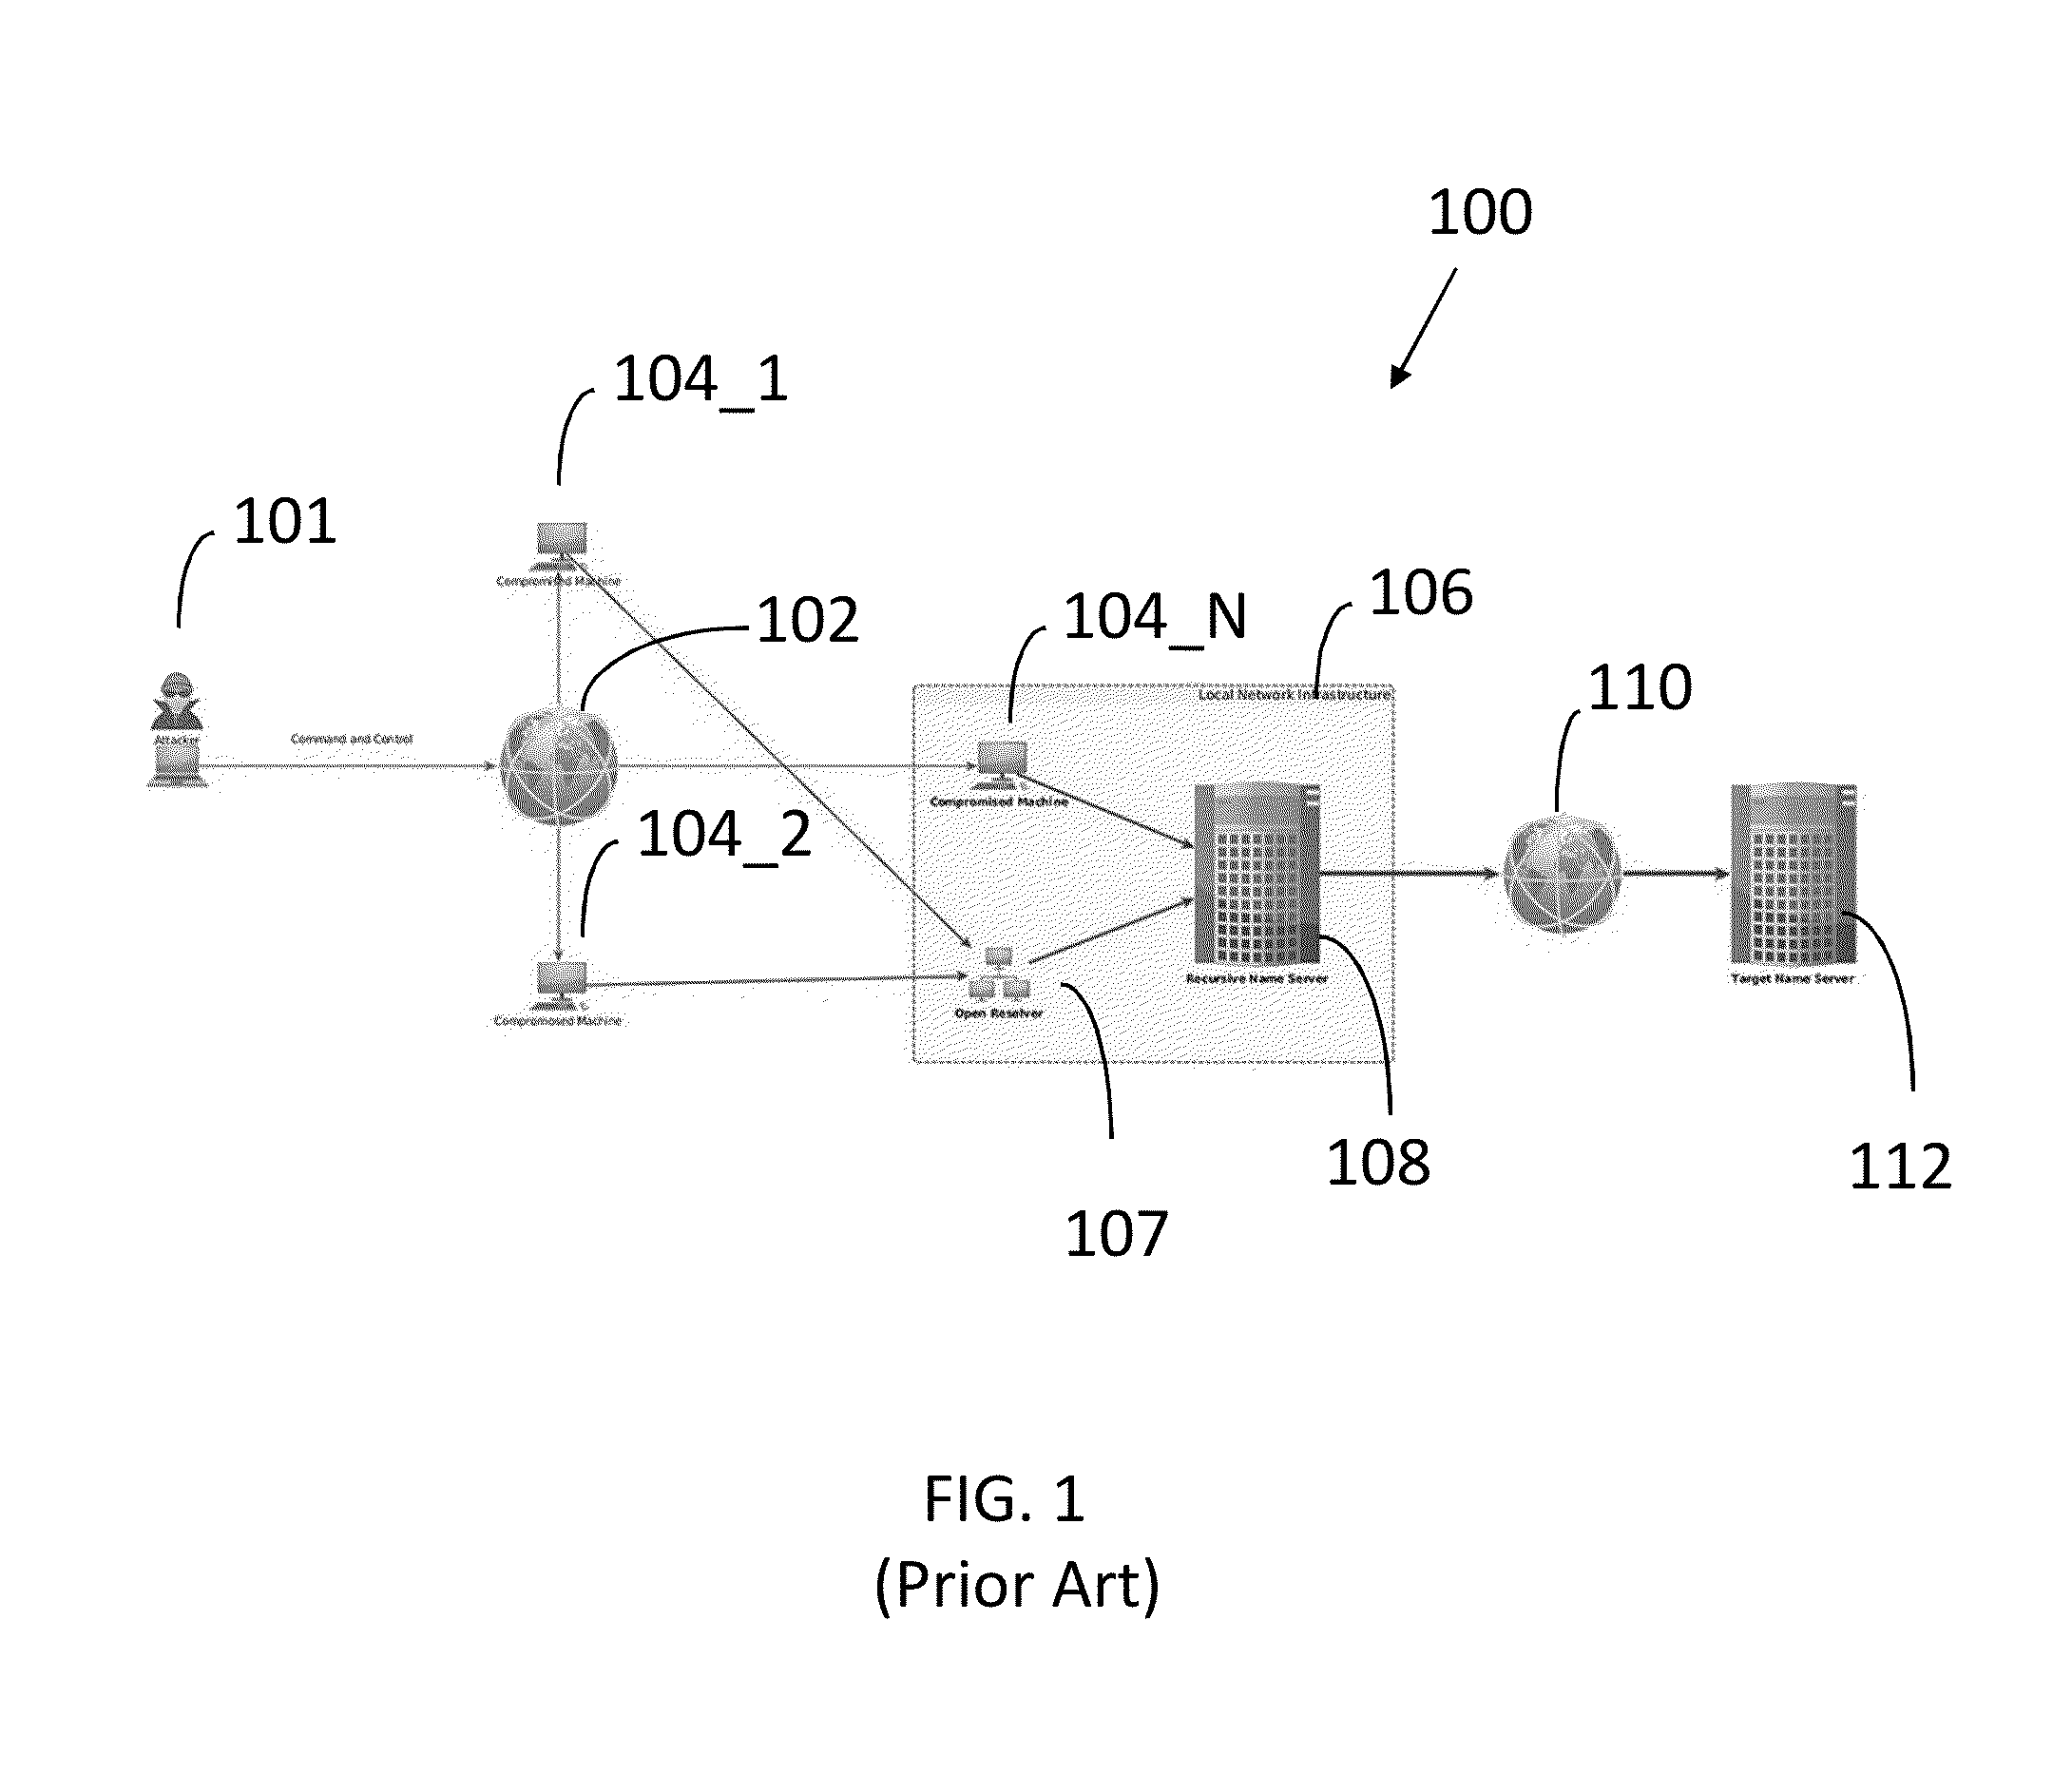 Apparatus and Method for Identifying Domain Name System Tunneling, Exfiltration and Infiltration